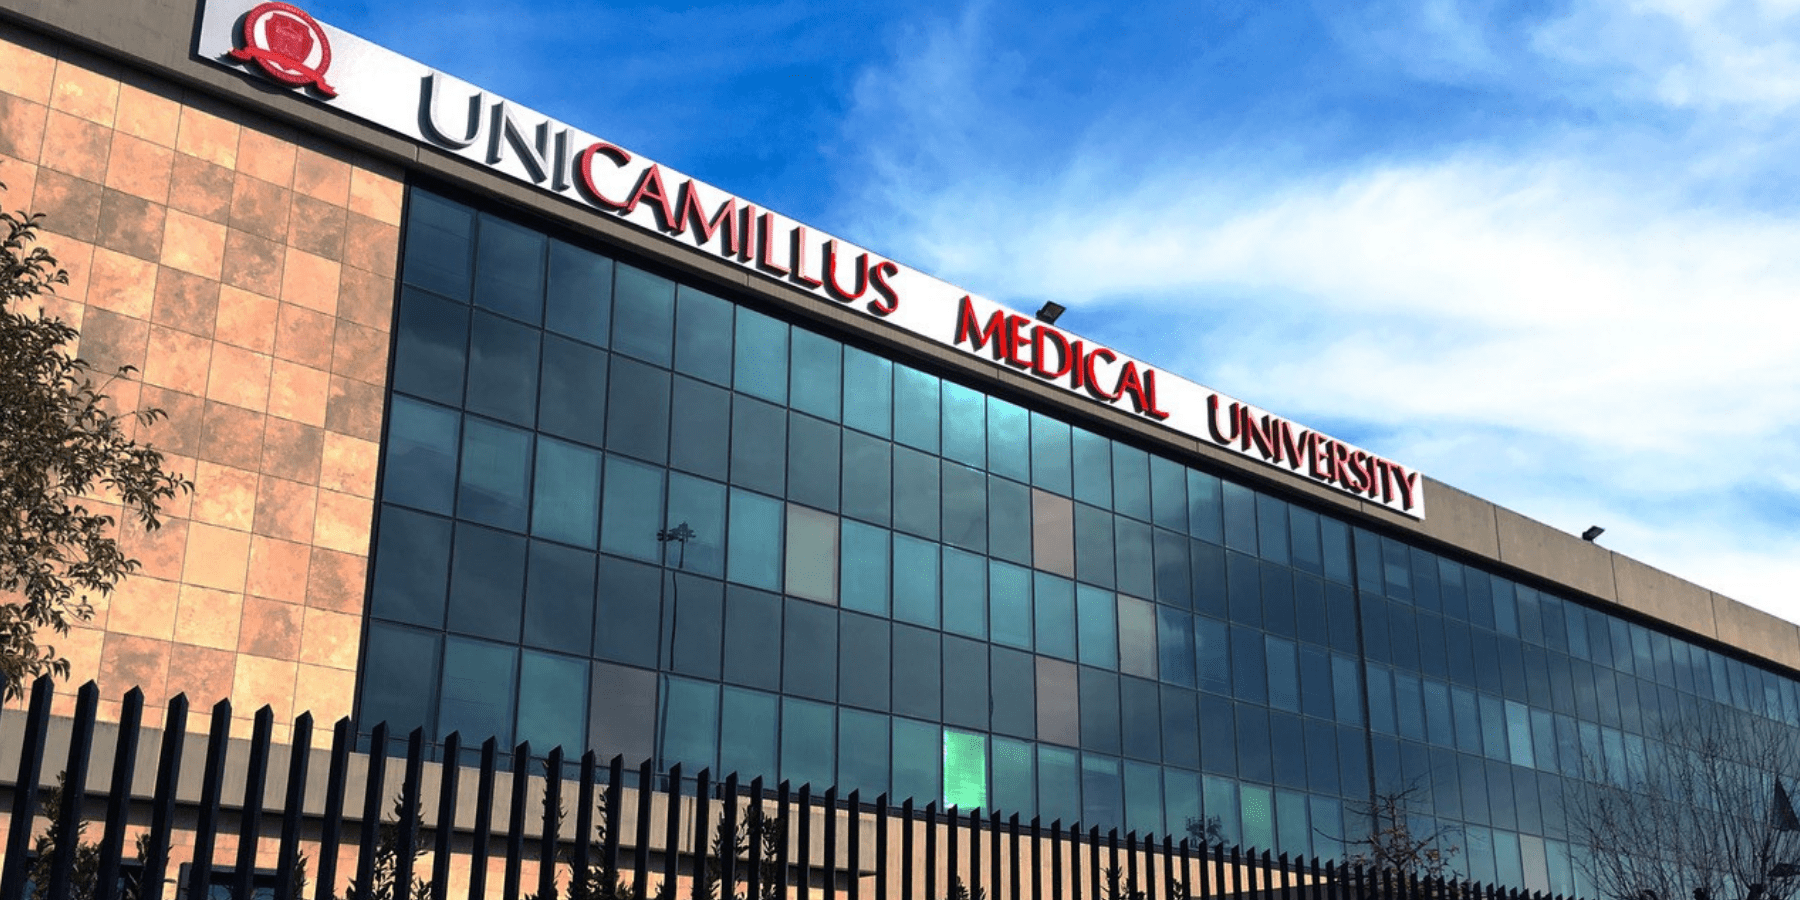 Study medicine in Italy at UniCamillus in Rome. Admissions soon open for 2022